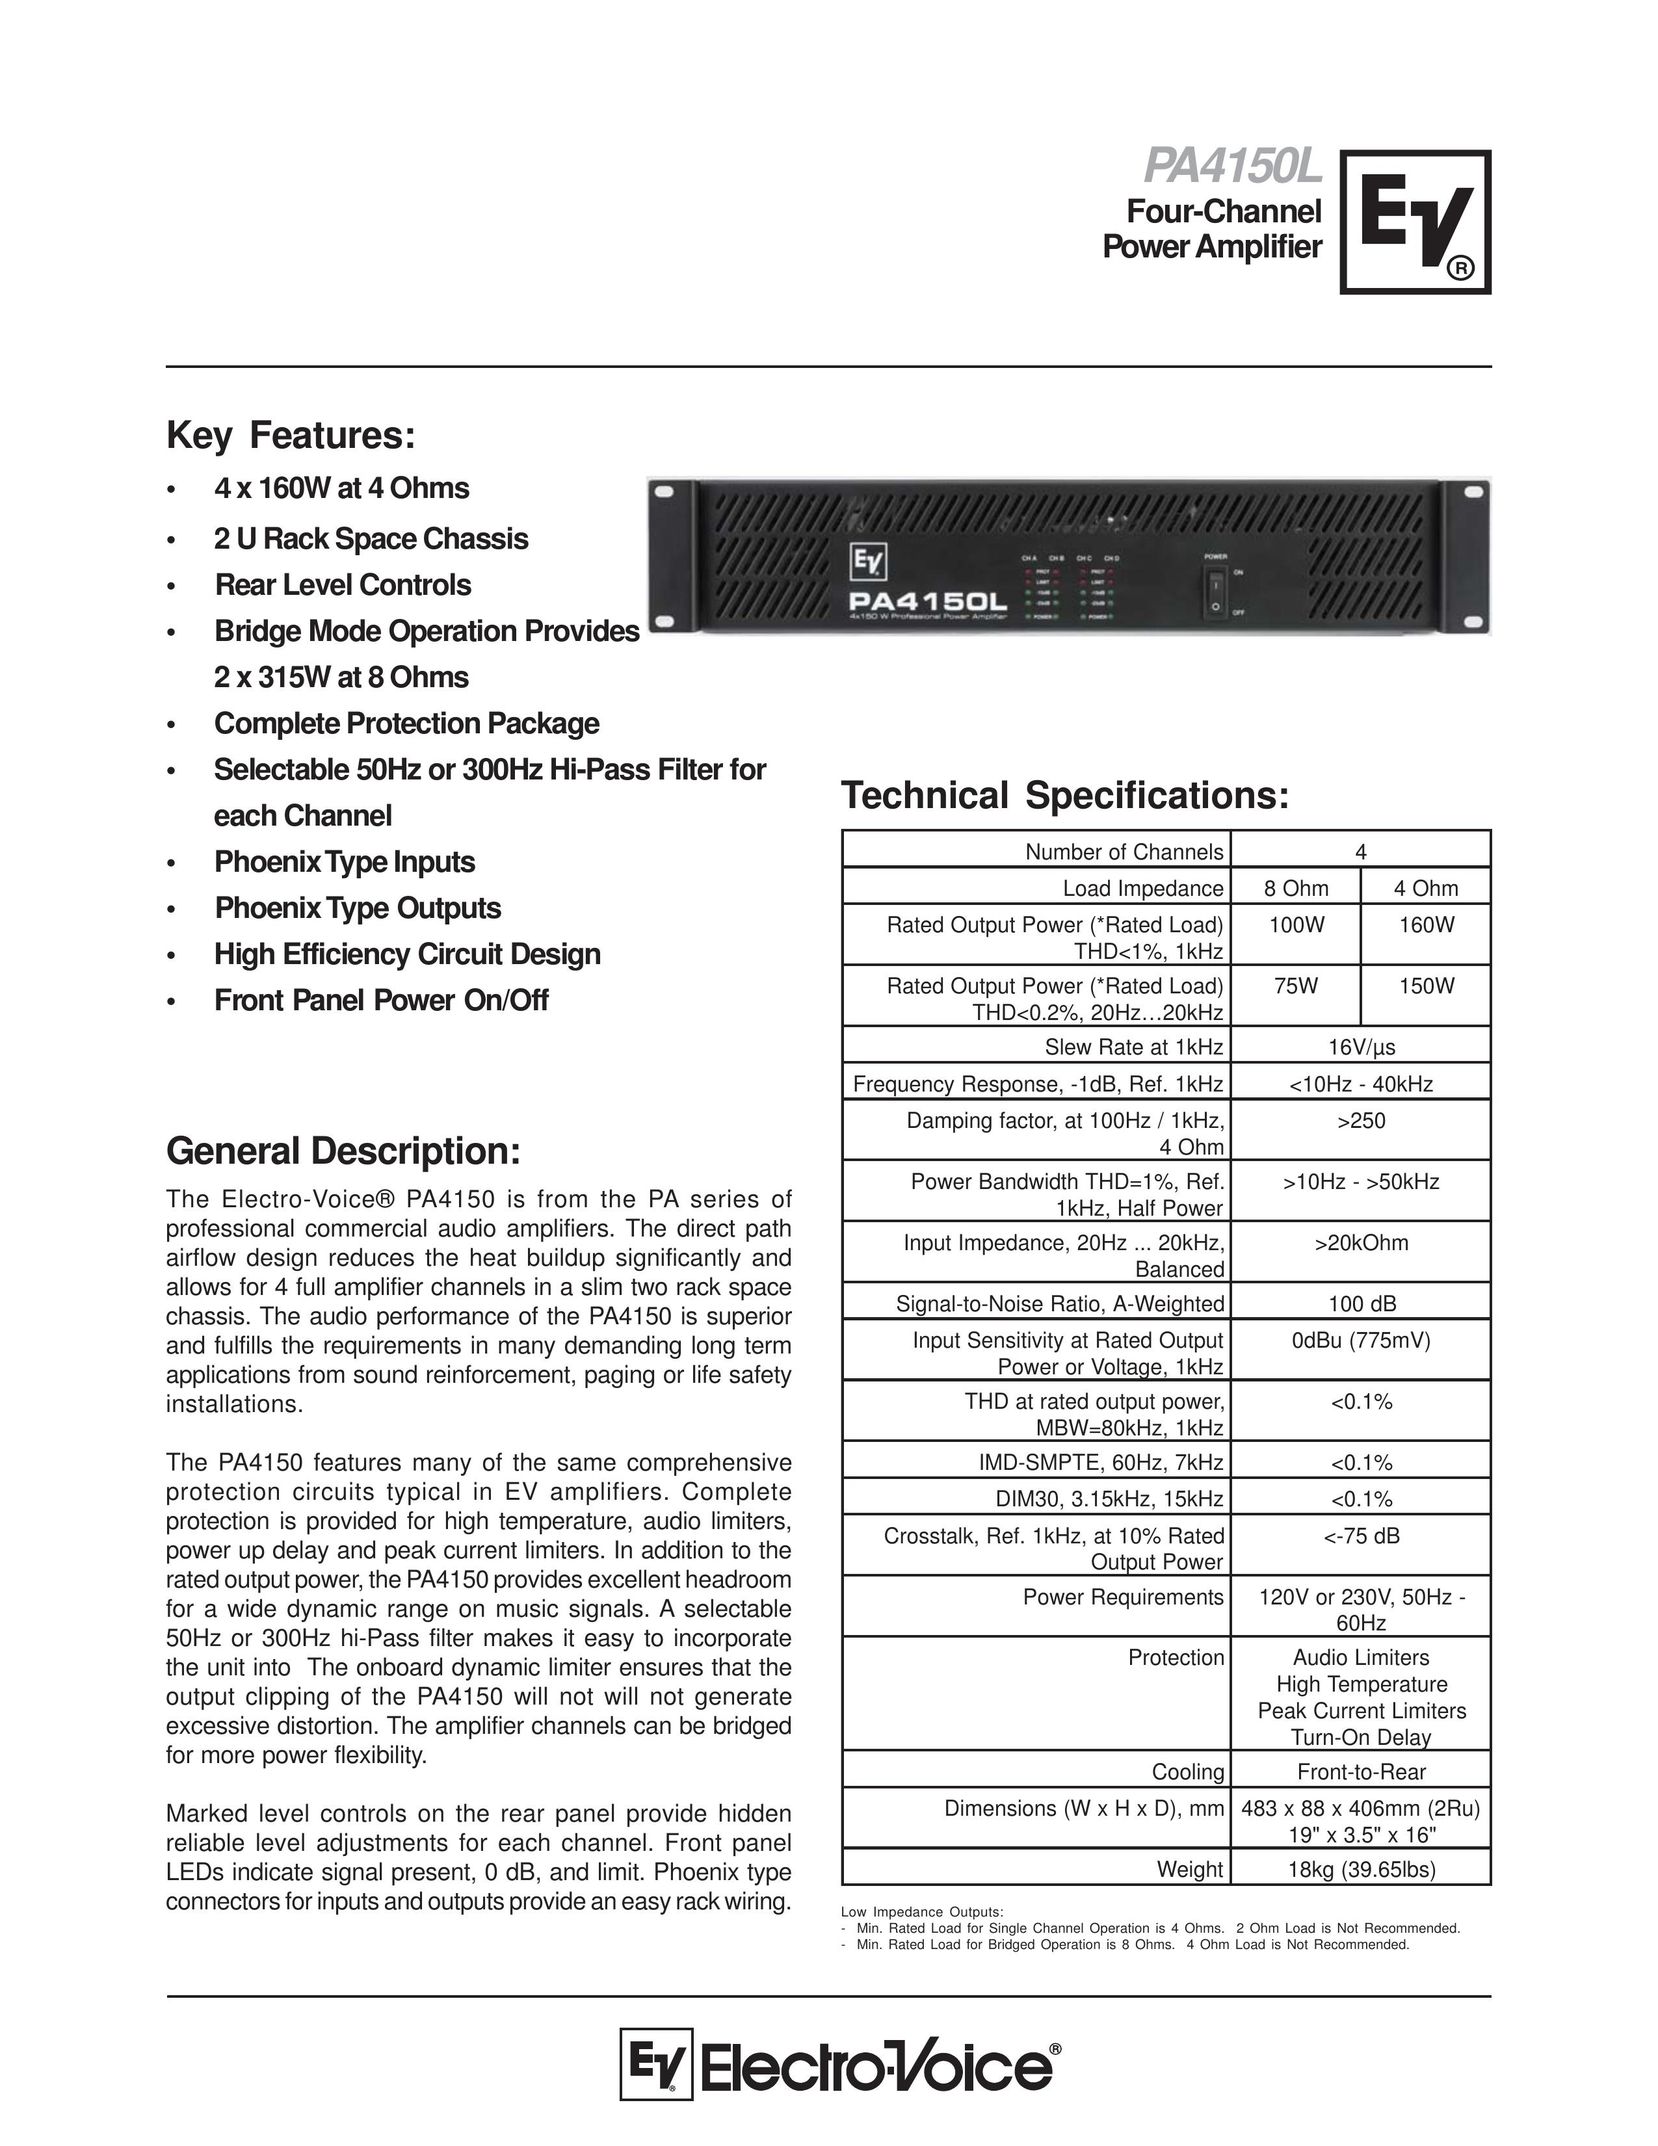 Electro-Voice PA4150 Stereo Amplifier User Manual